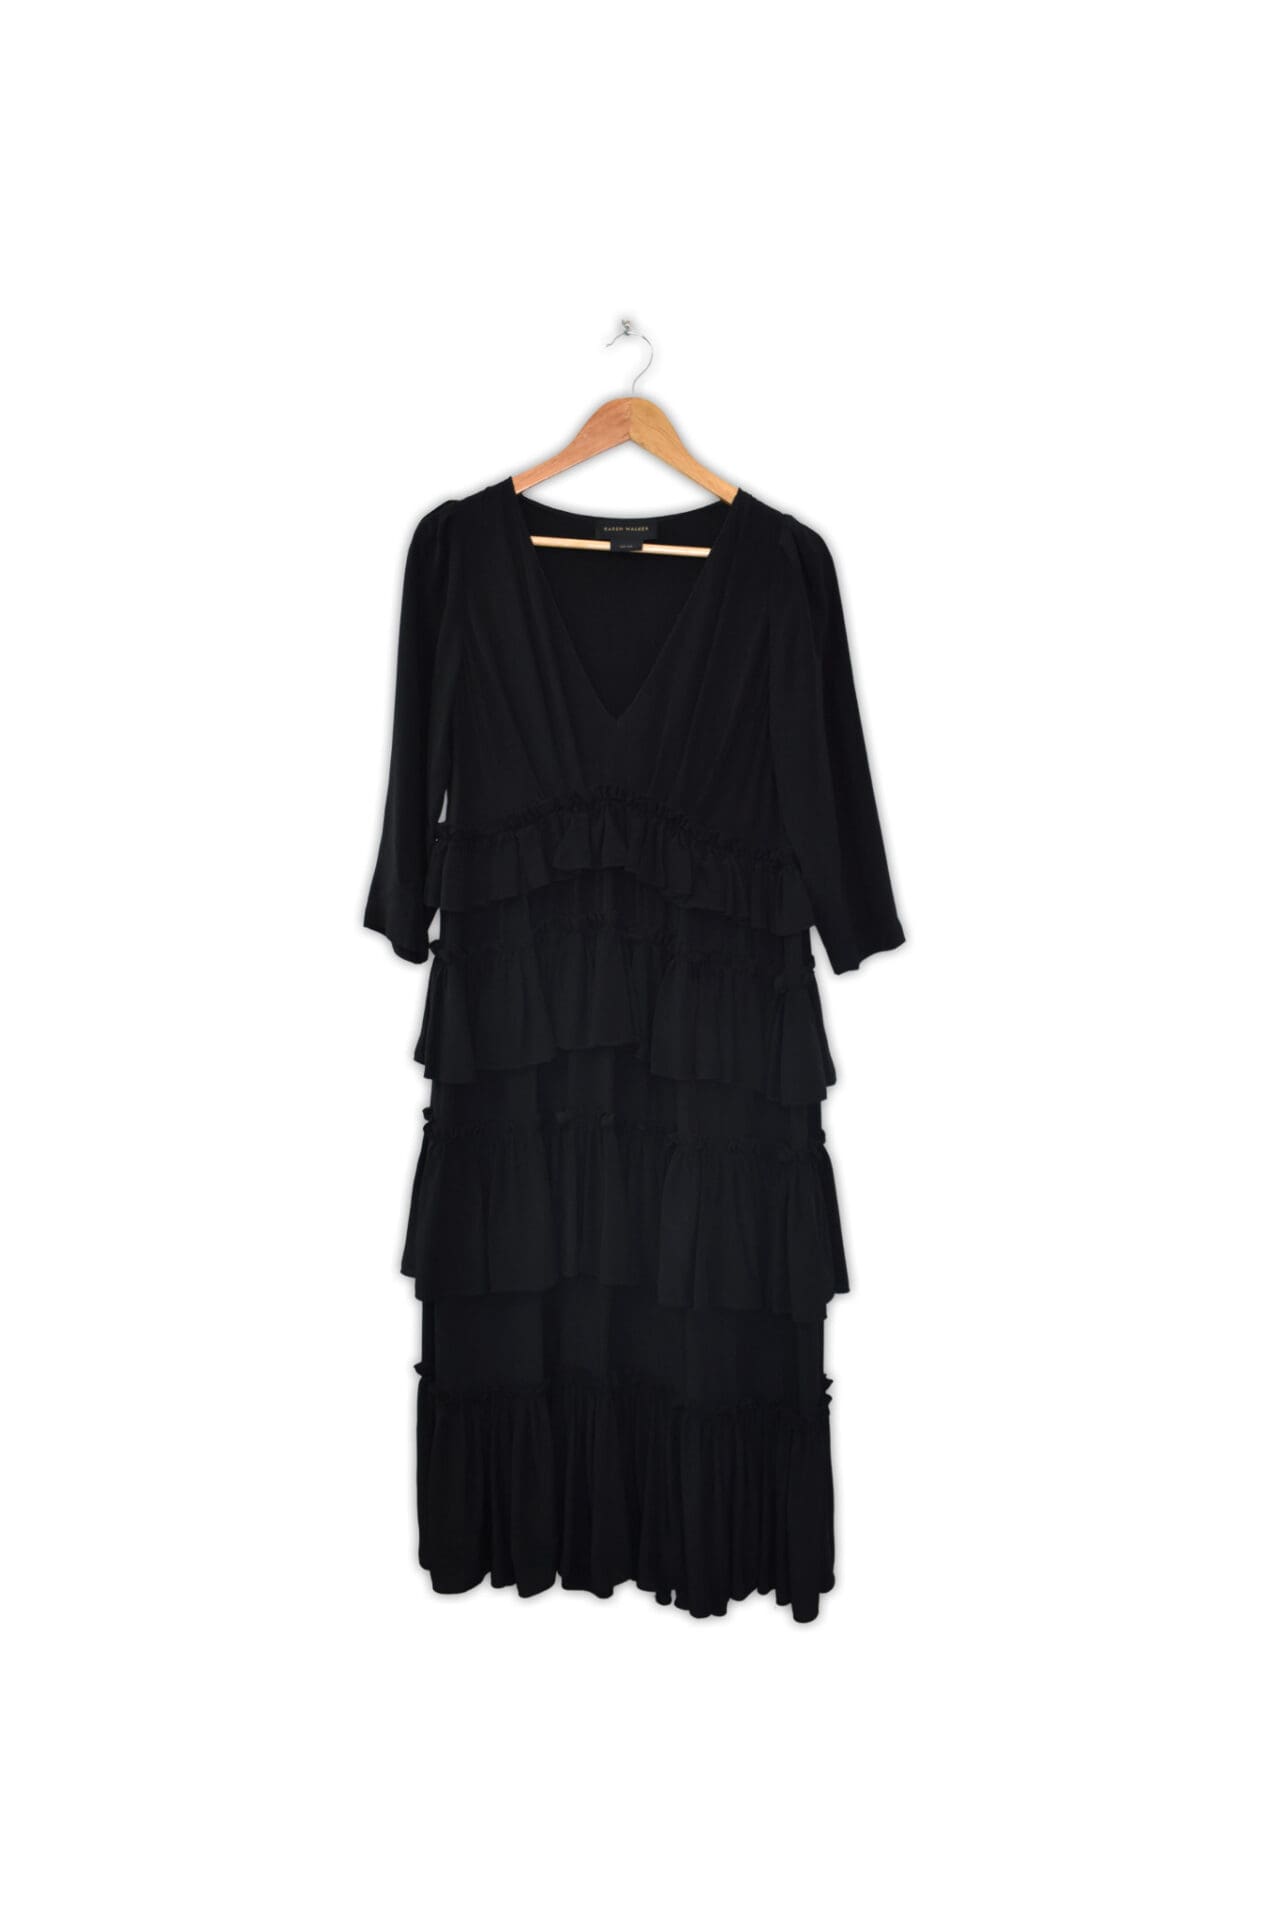 Frilly, long sleeve dress. Made in China.